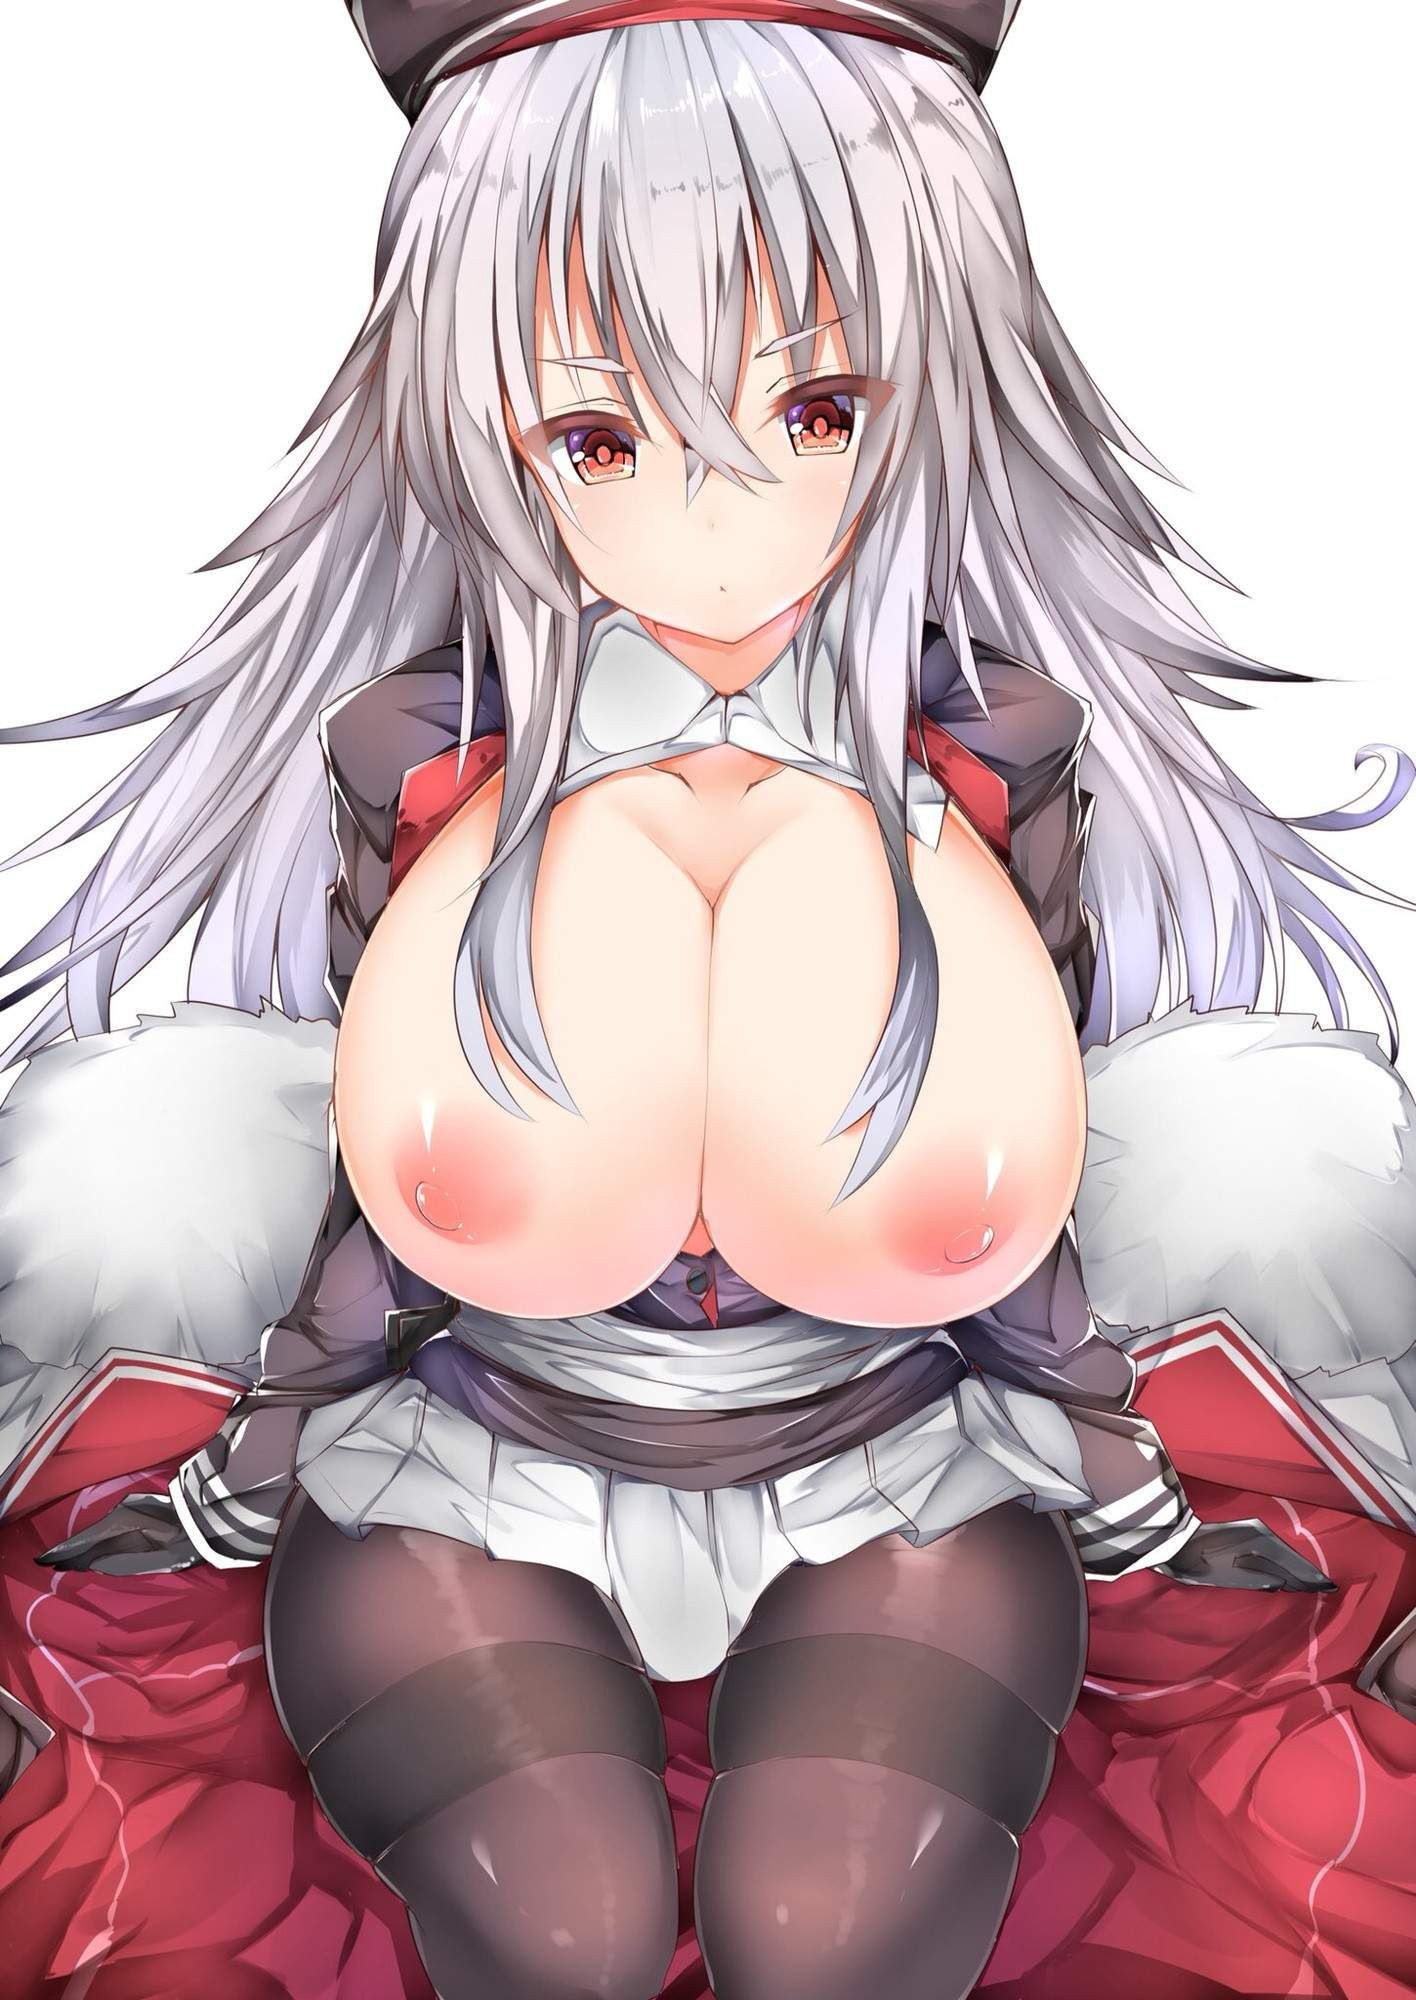 Spain An Erotic Image That Goes Through Graf Zeppelin Of Ahe Face That Is About To Fall Into Pleasure! 【Azur Lane】 19yo